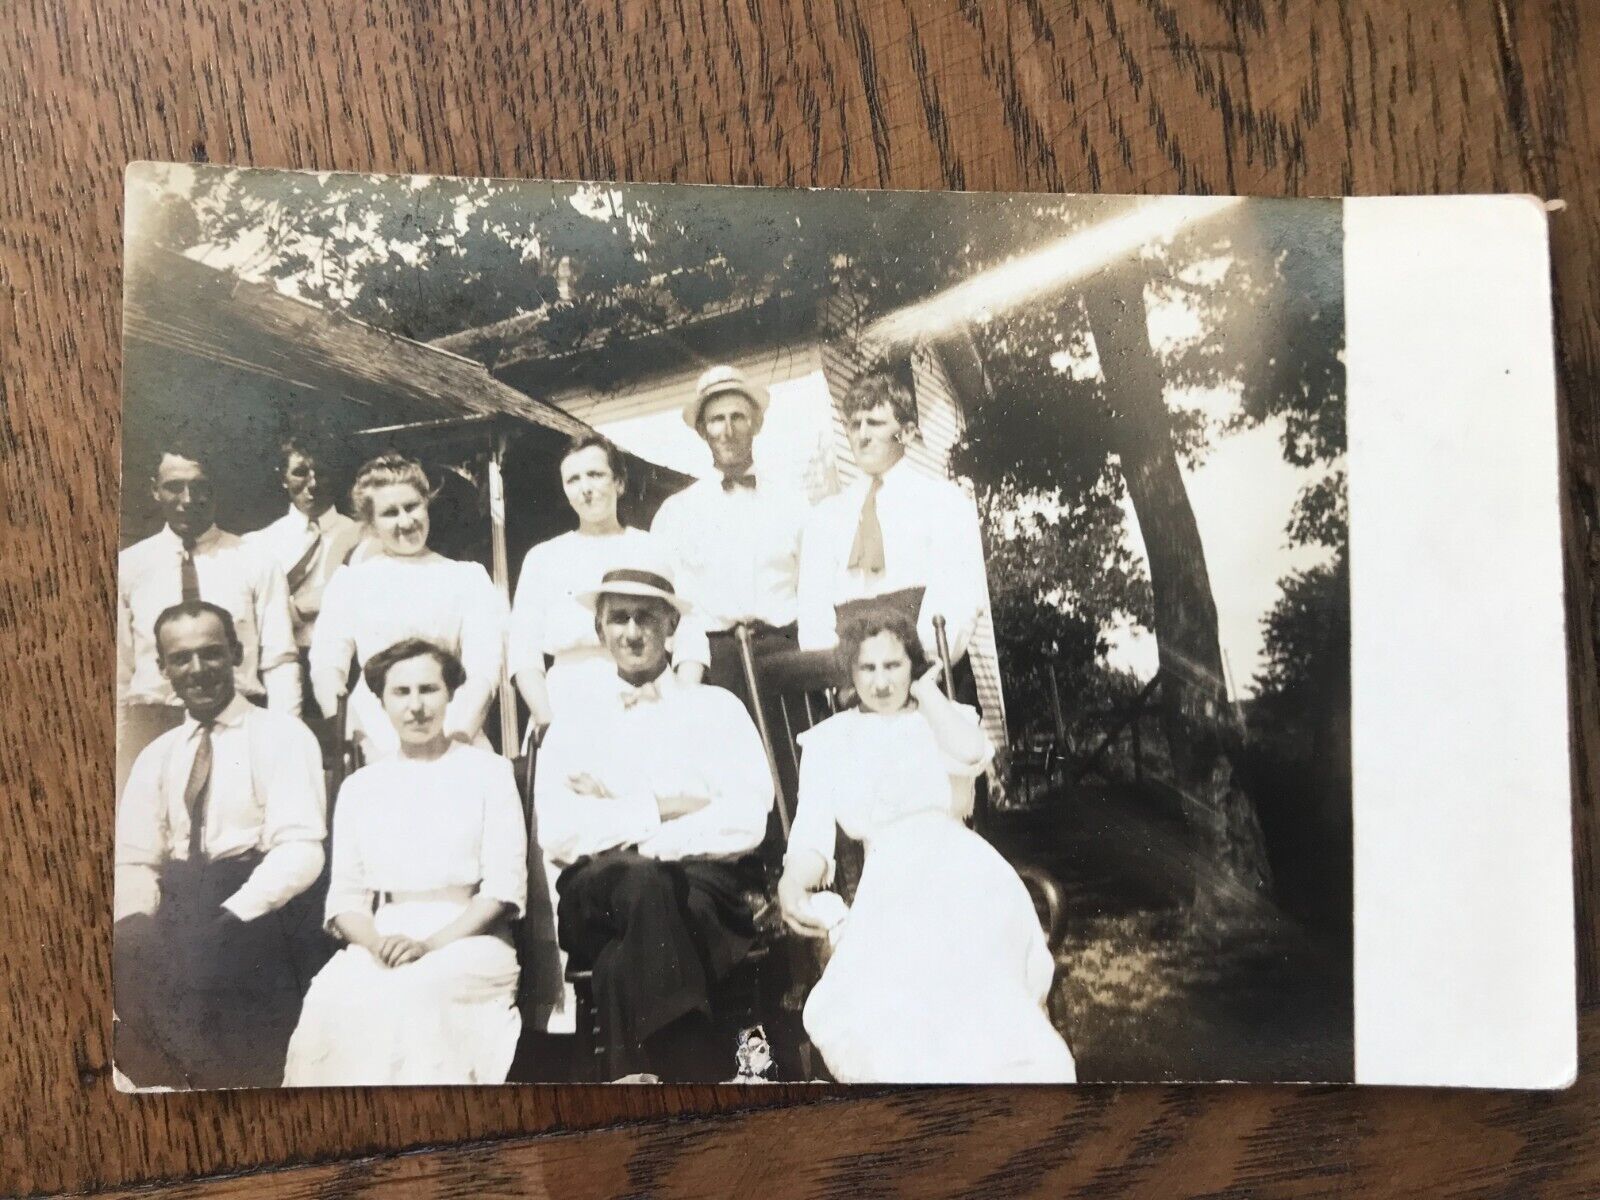 Large Group of People Outdoor Photo RPPC Postcard